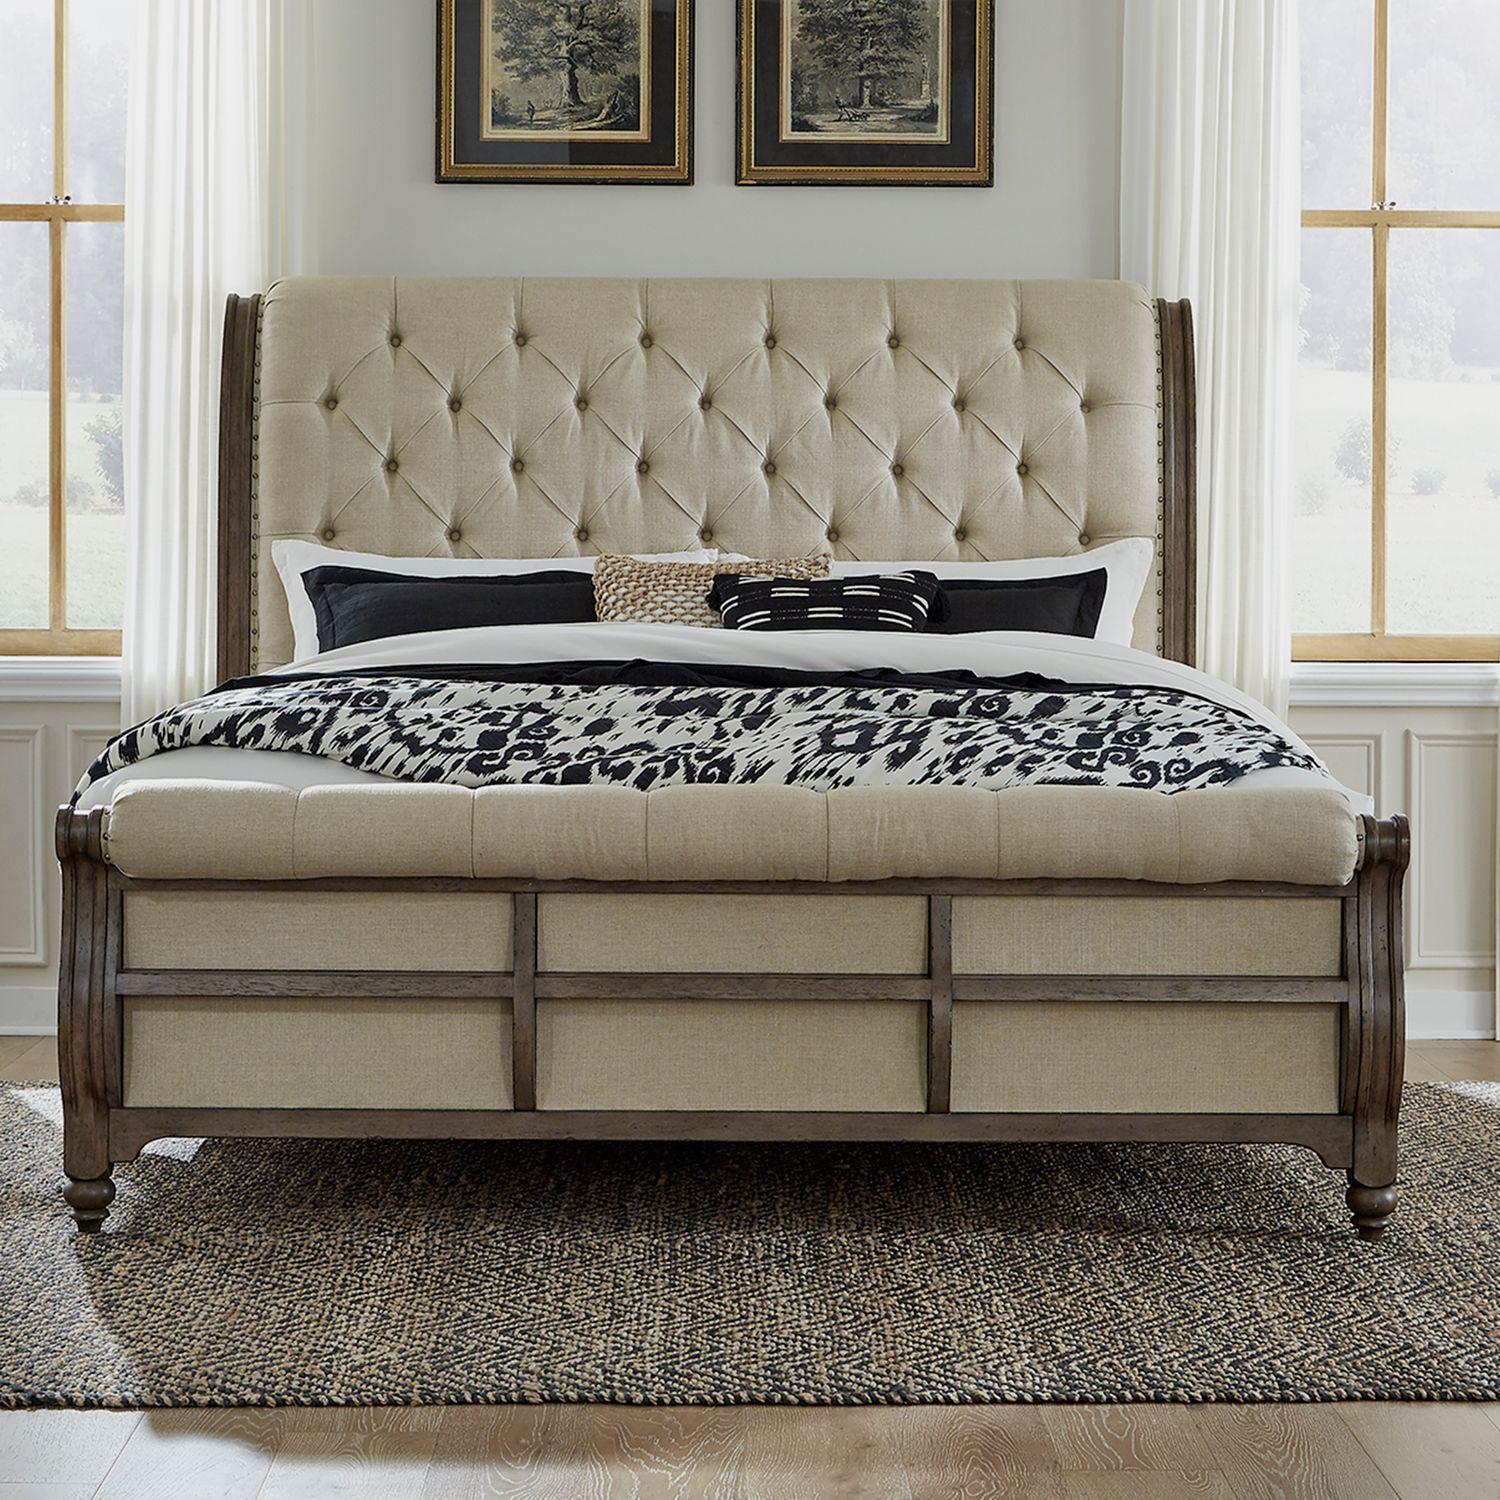 Transitional Sleigh Bed Americana Farmhouse (615-BR) 615-BR-QSL in Taupe, Black Linen